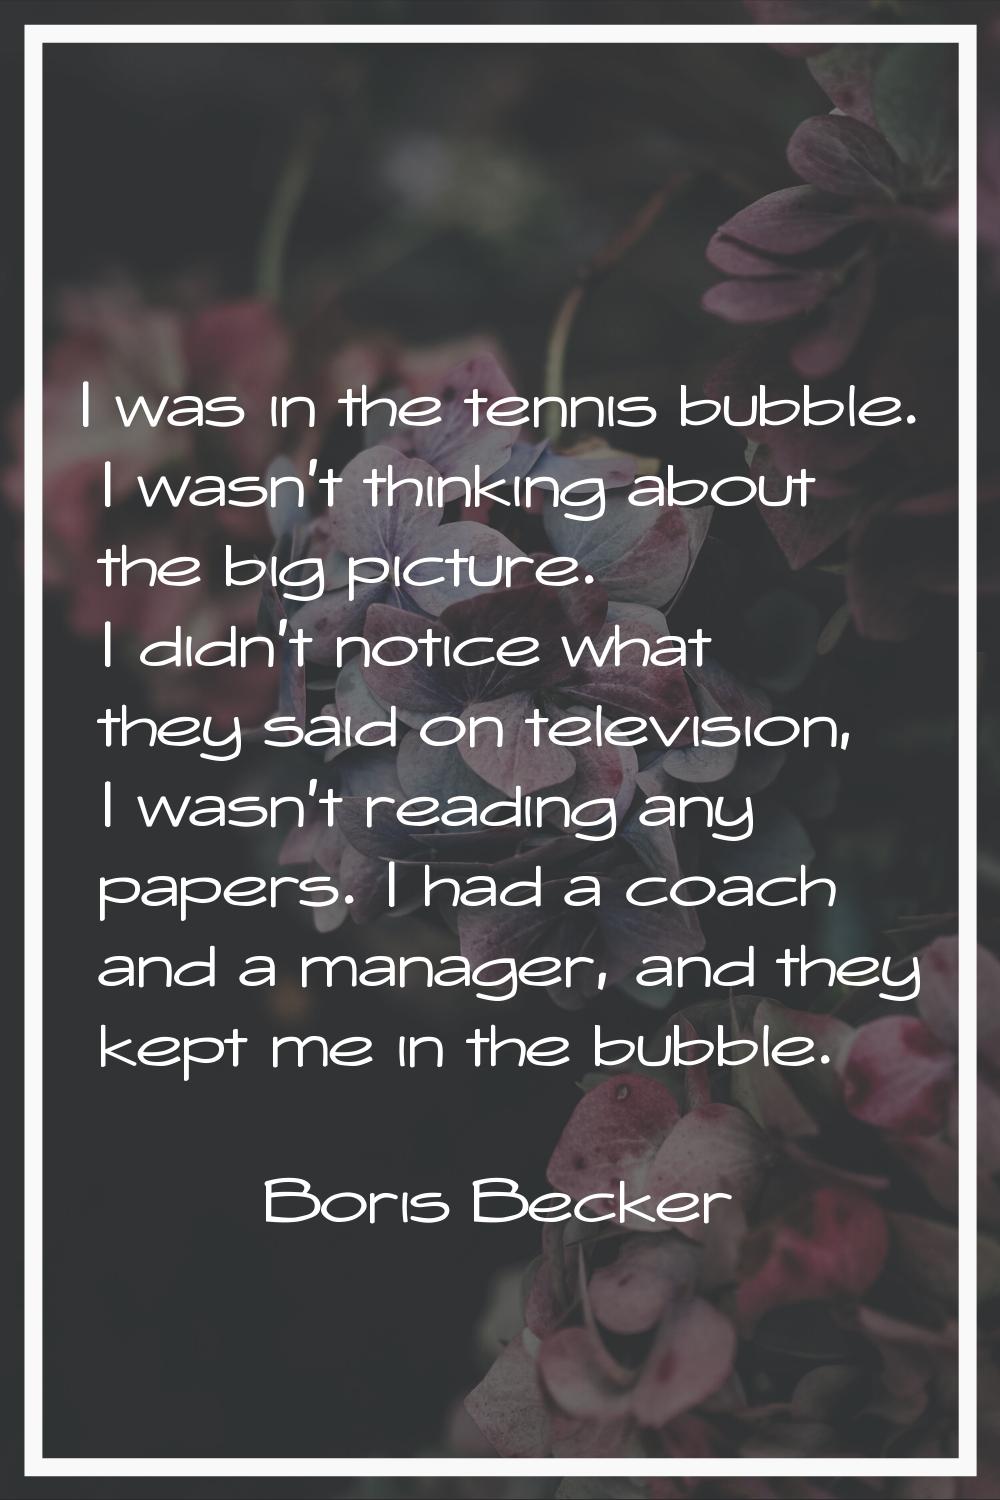 I was in the tennis bubble. I wasn't thinking about the big picture. I didn't notice what they said